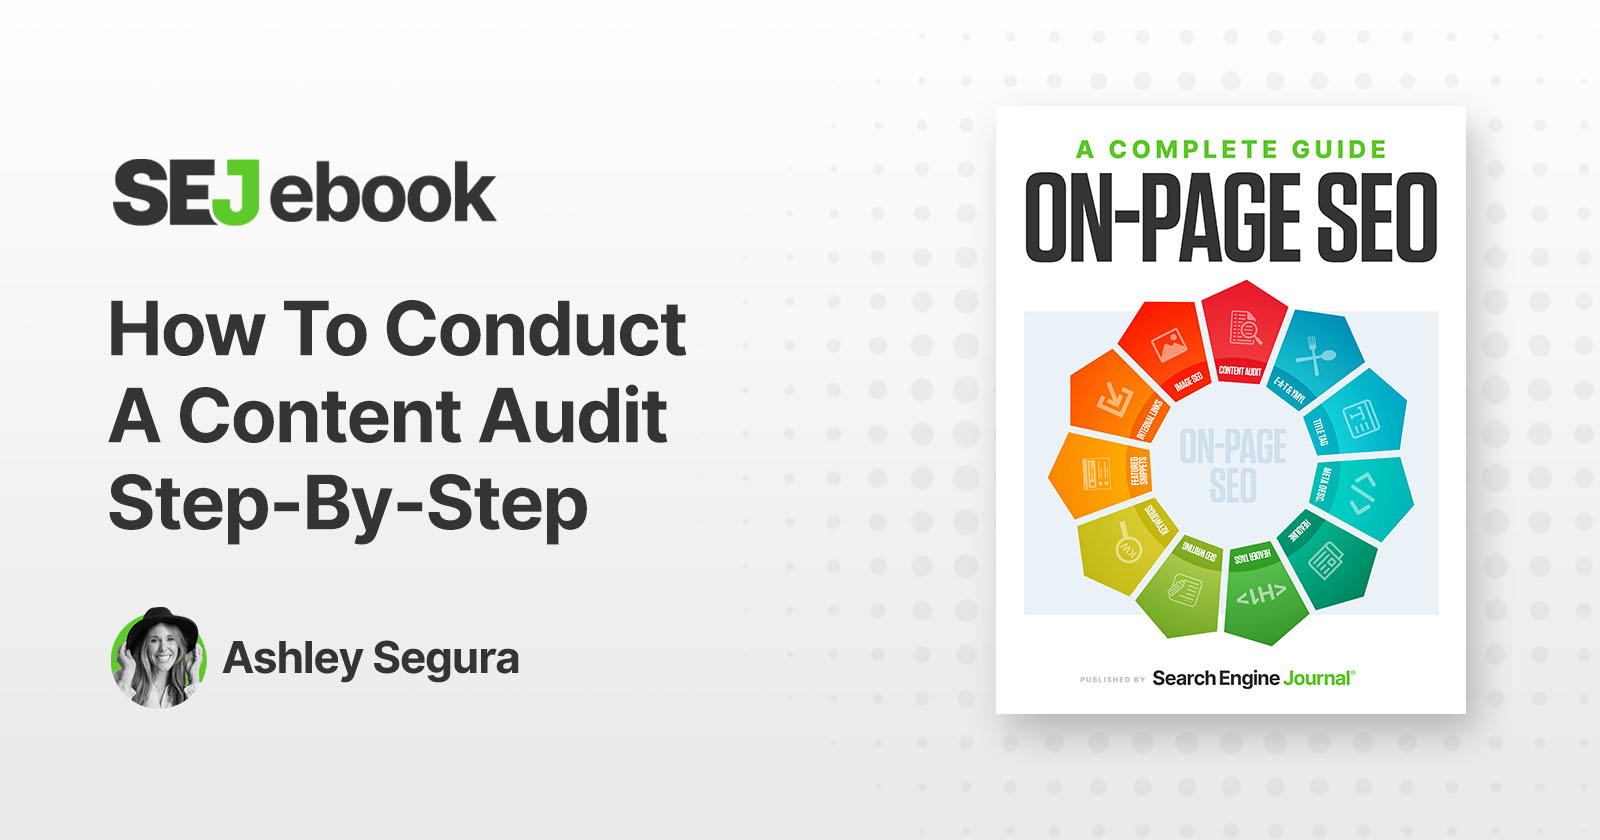 How To Conduct A Content Audit Step-By-Step